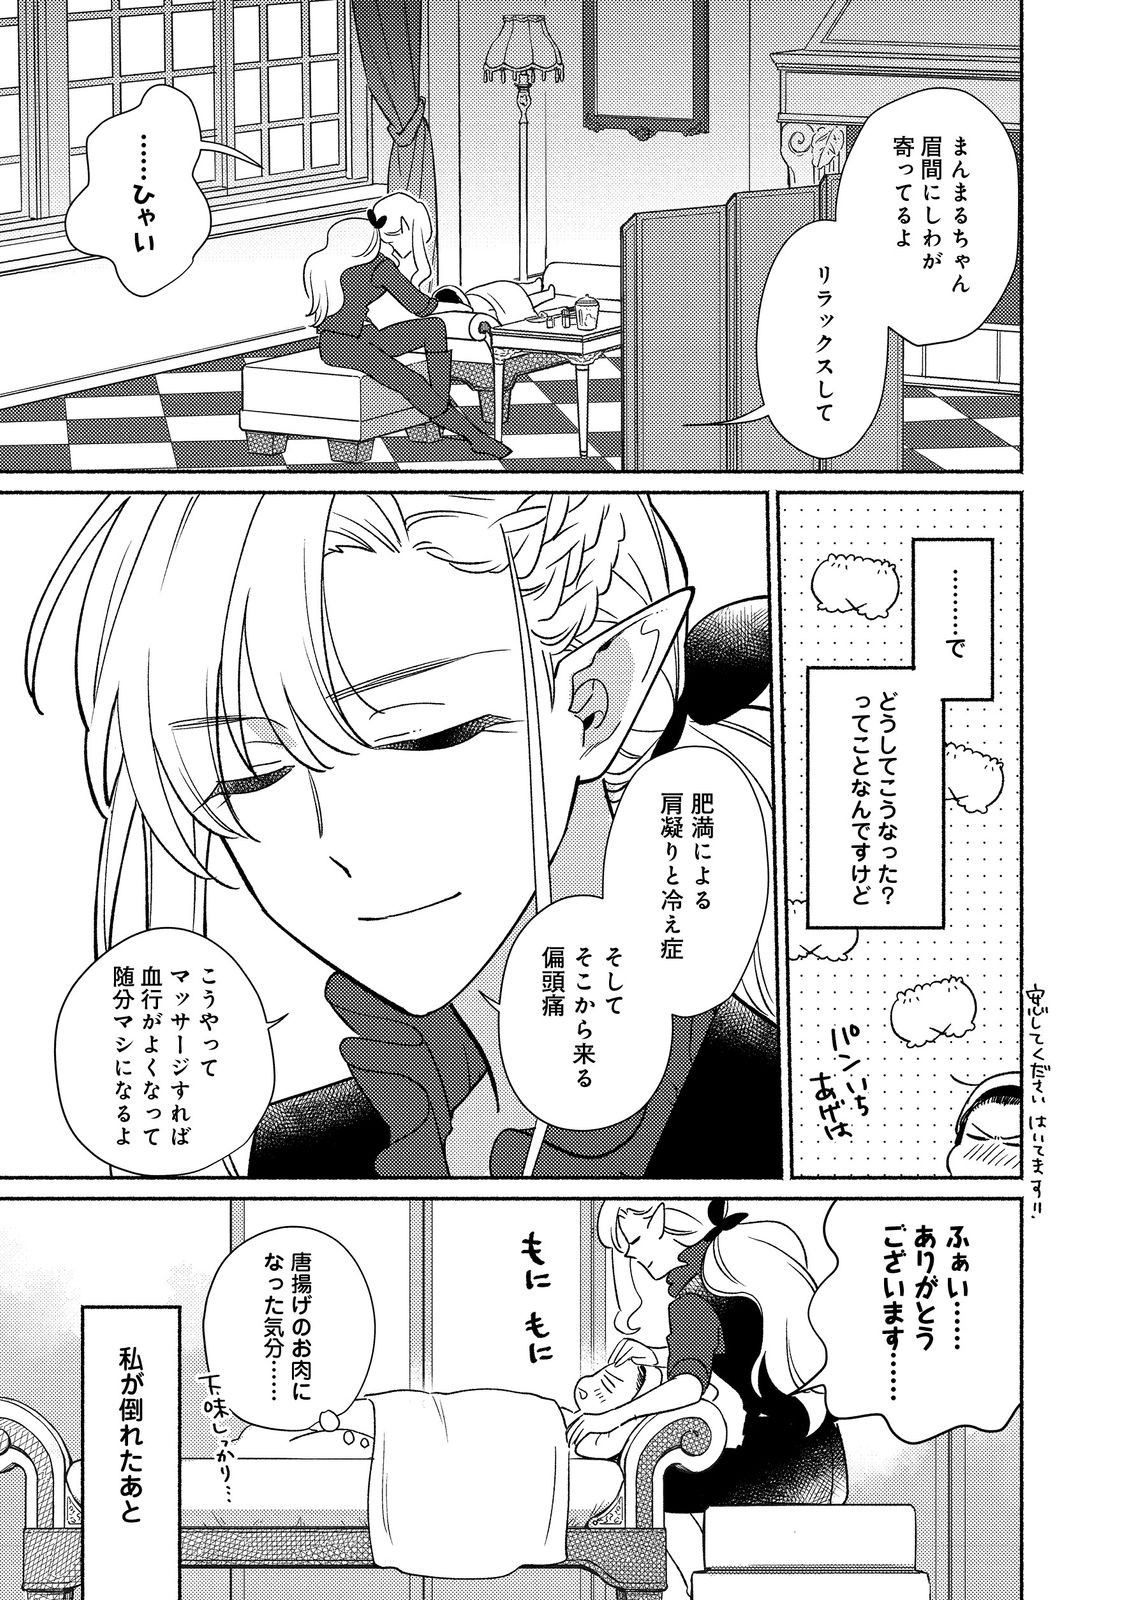 I’m the White Pig Nobleman 第20.1話 - Page 5